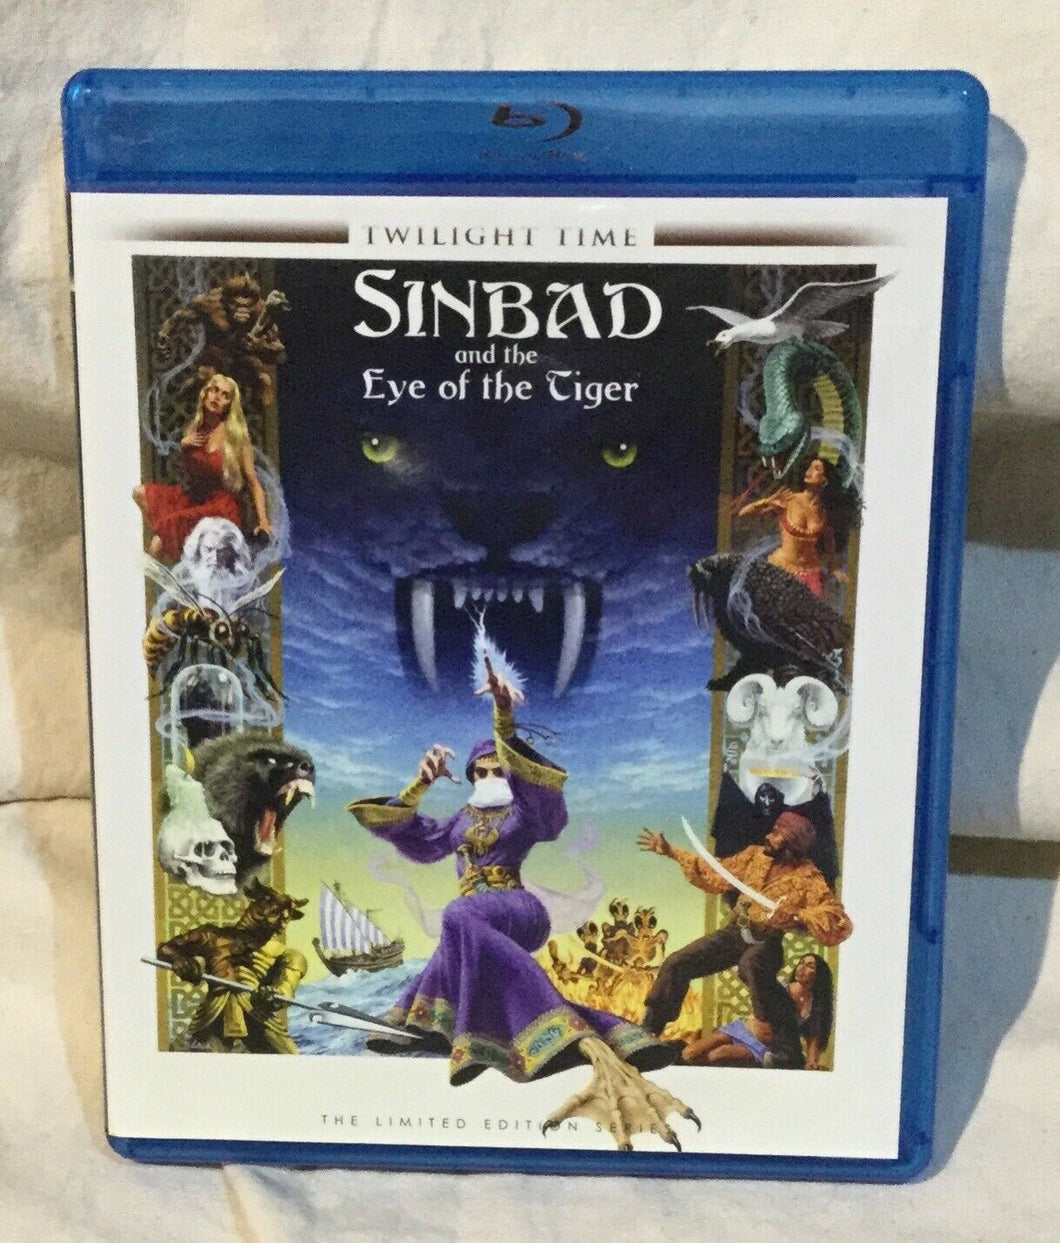 SINBAD AND THE EYE OF THE TIGER - TWILIGHT TIME LIMITED EDITION - BLU RAY